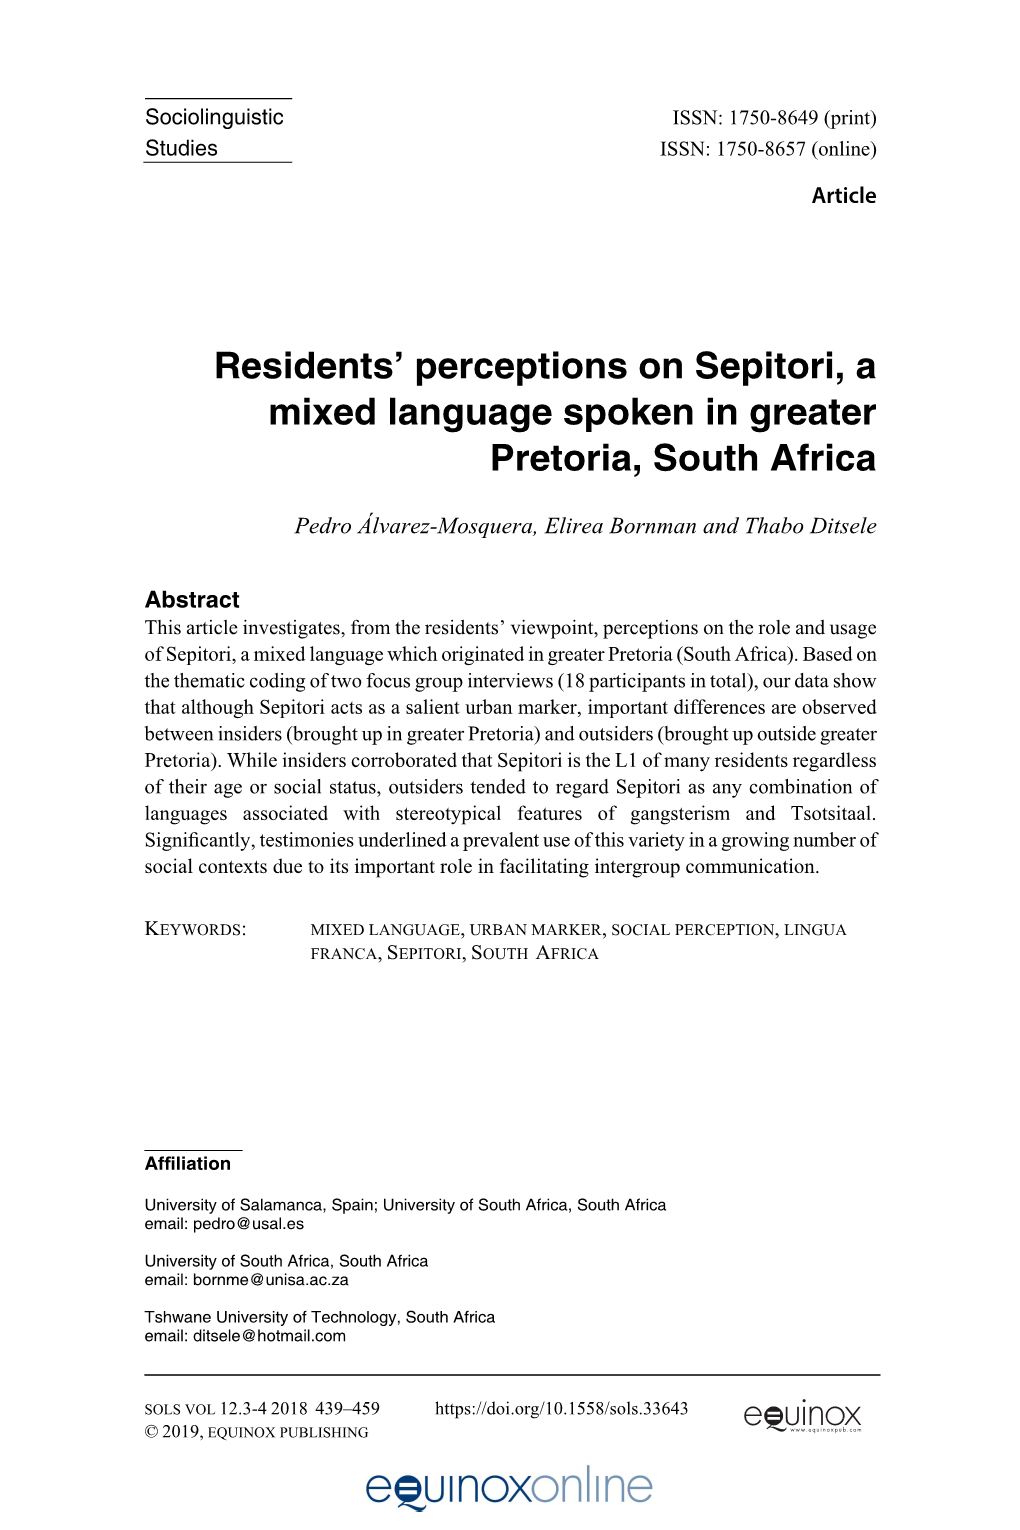 Residents' Perceptions on Sepitori, a Mixed Language Spoken in Greater